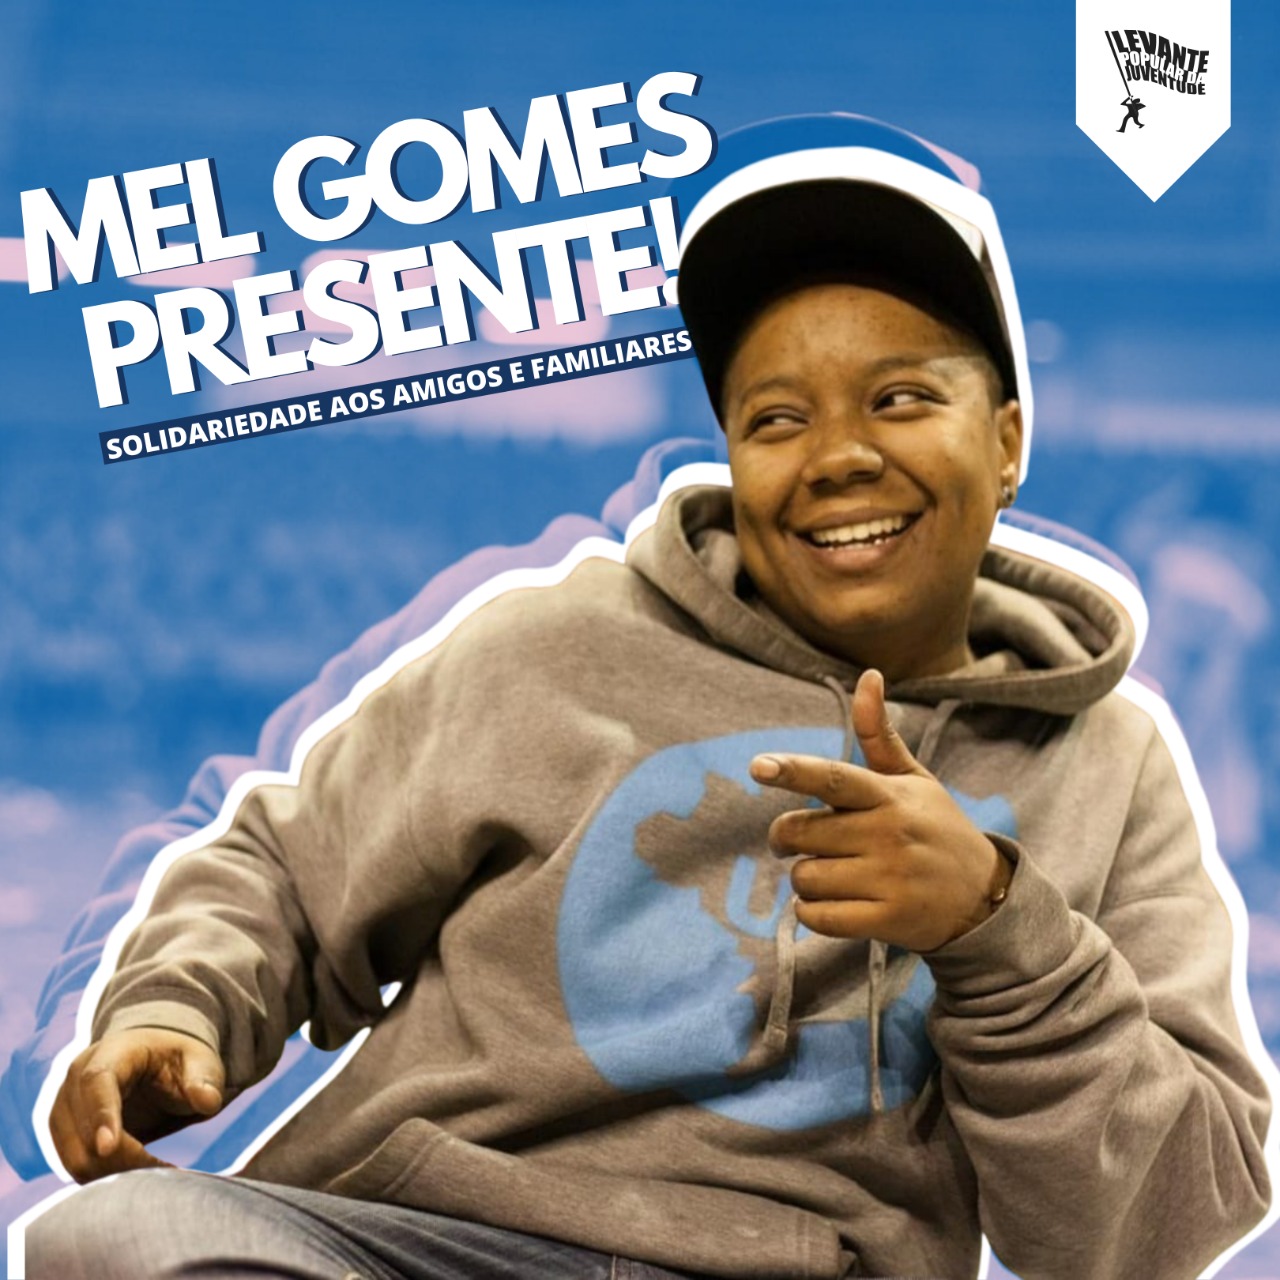 You are currently viewing MEL GOMES PRESENTE, HOJE E SEMPRE!